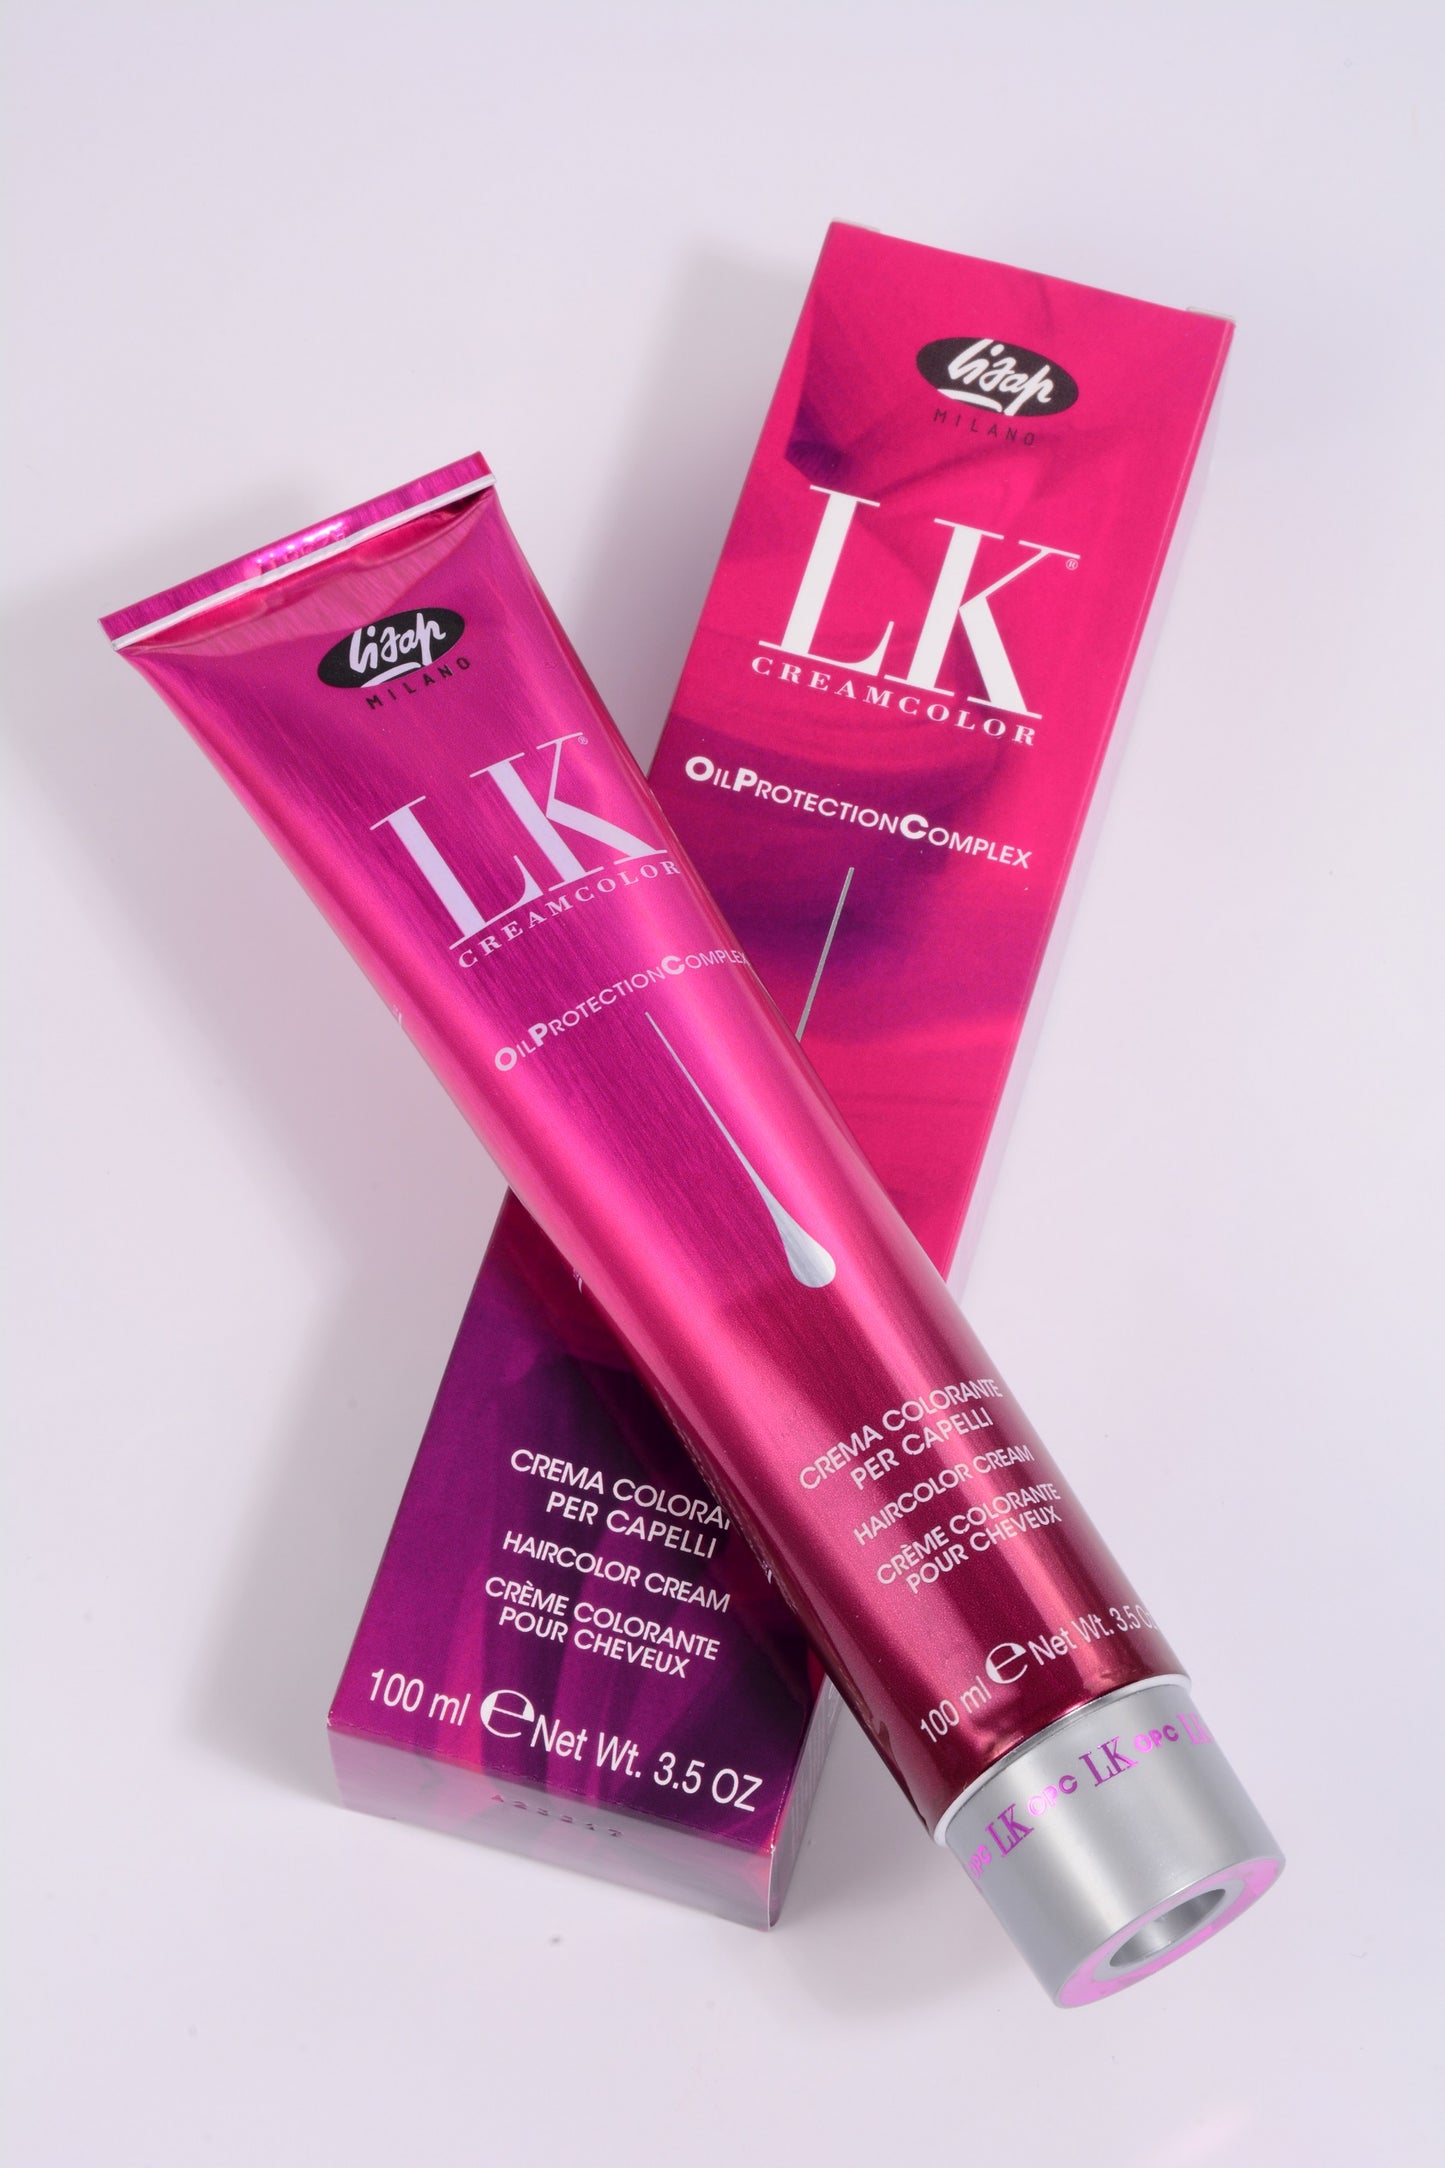 LK Creamcolor 7/3 Oil Protection Complex